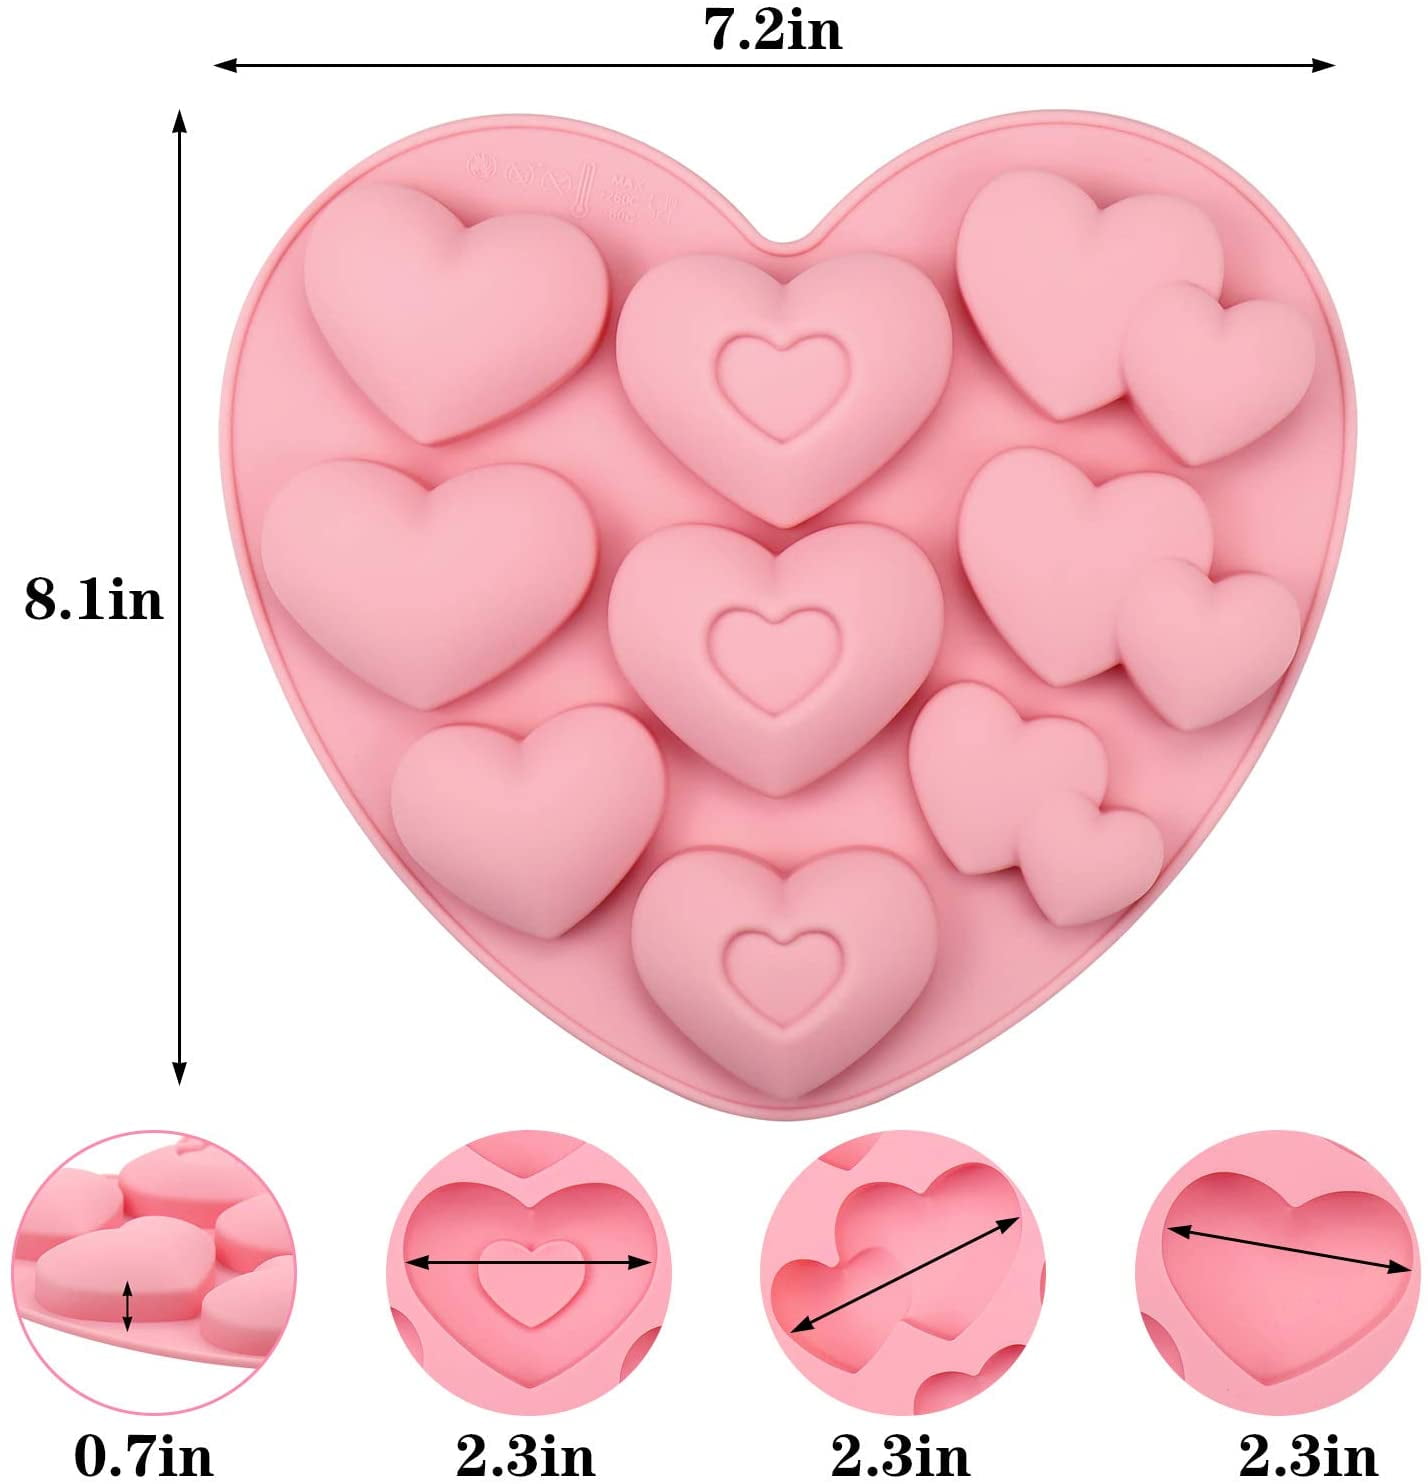 COKWO Silicone Heart Molds for Baking 2 Pack - 8 Cavity Heart